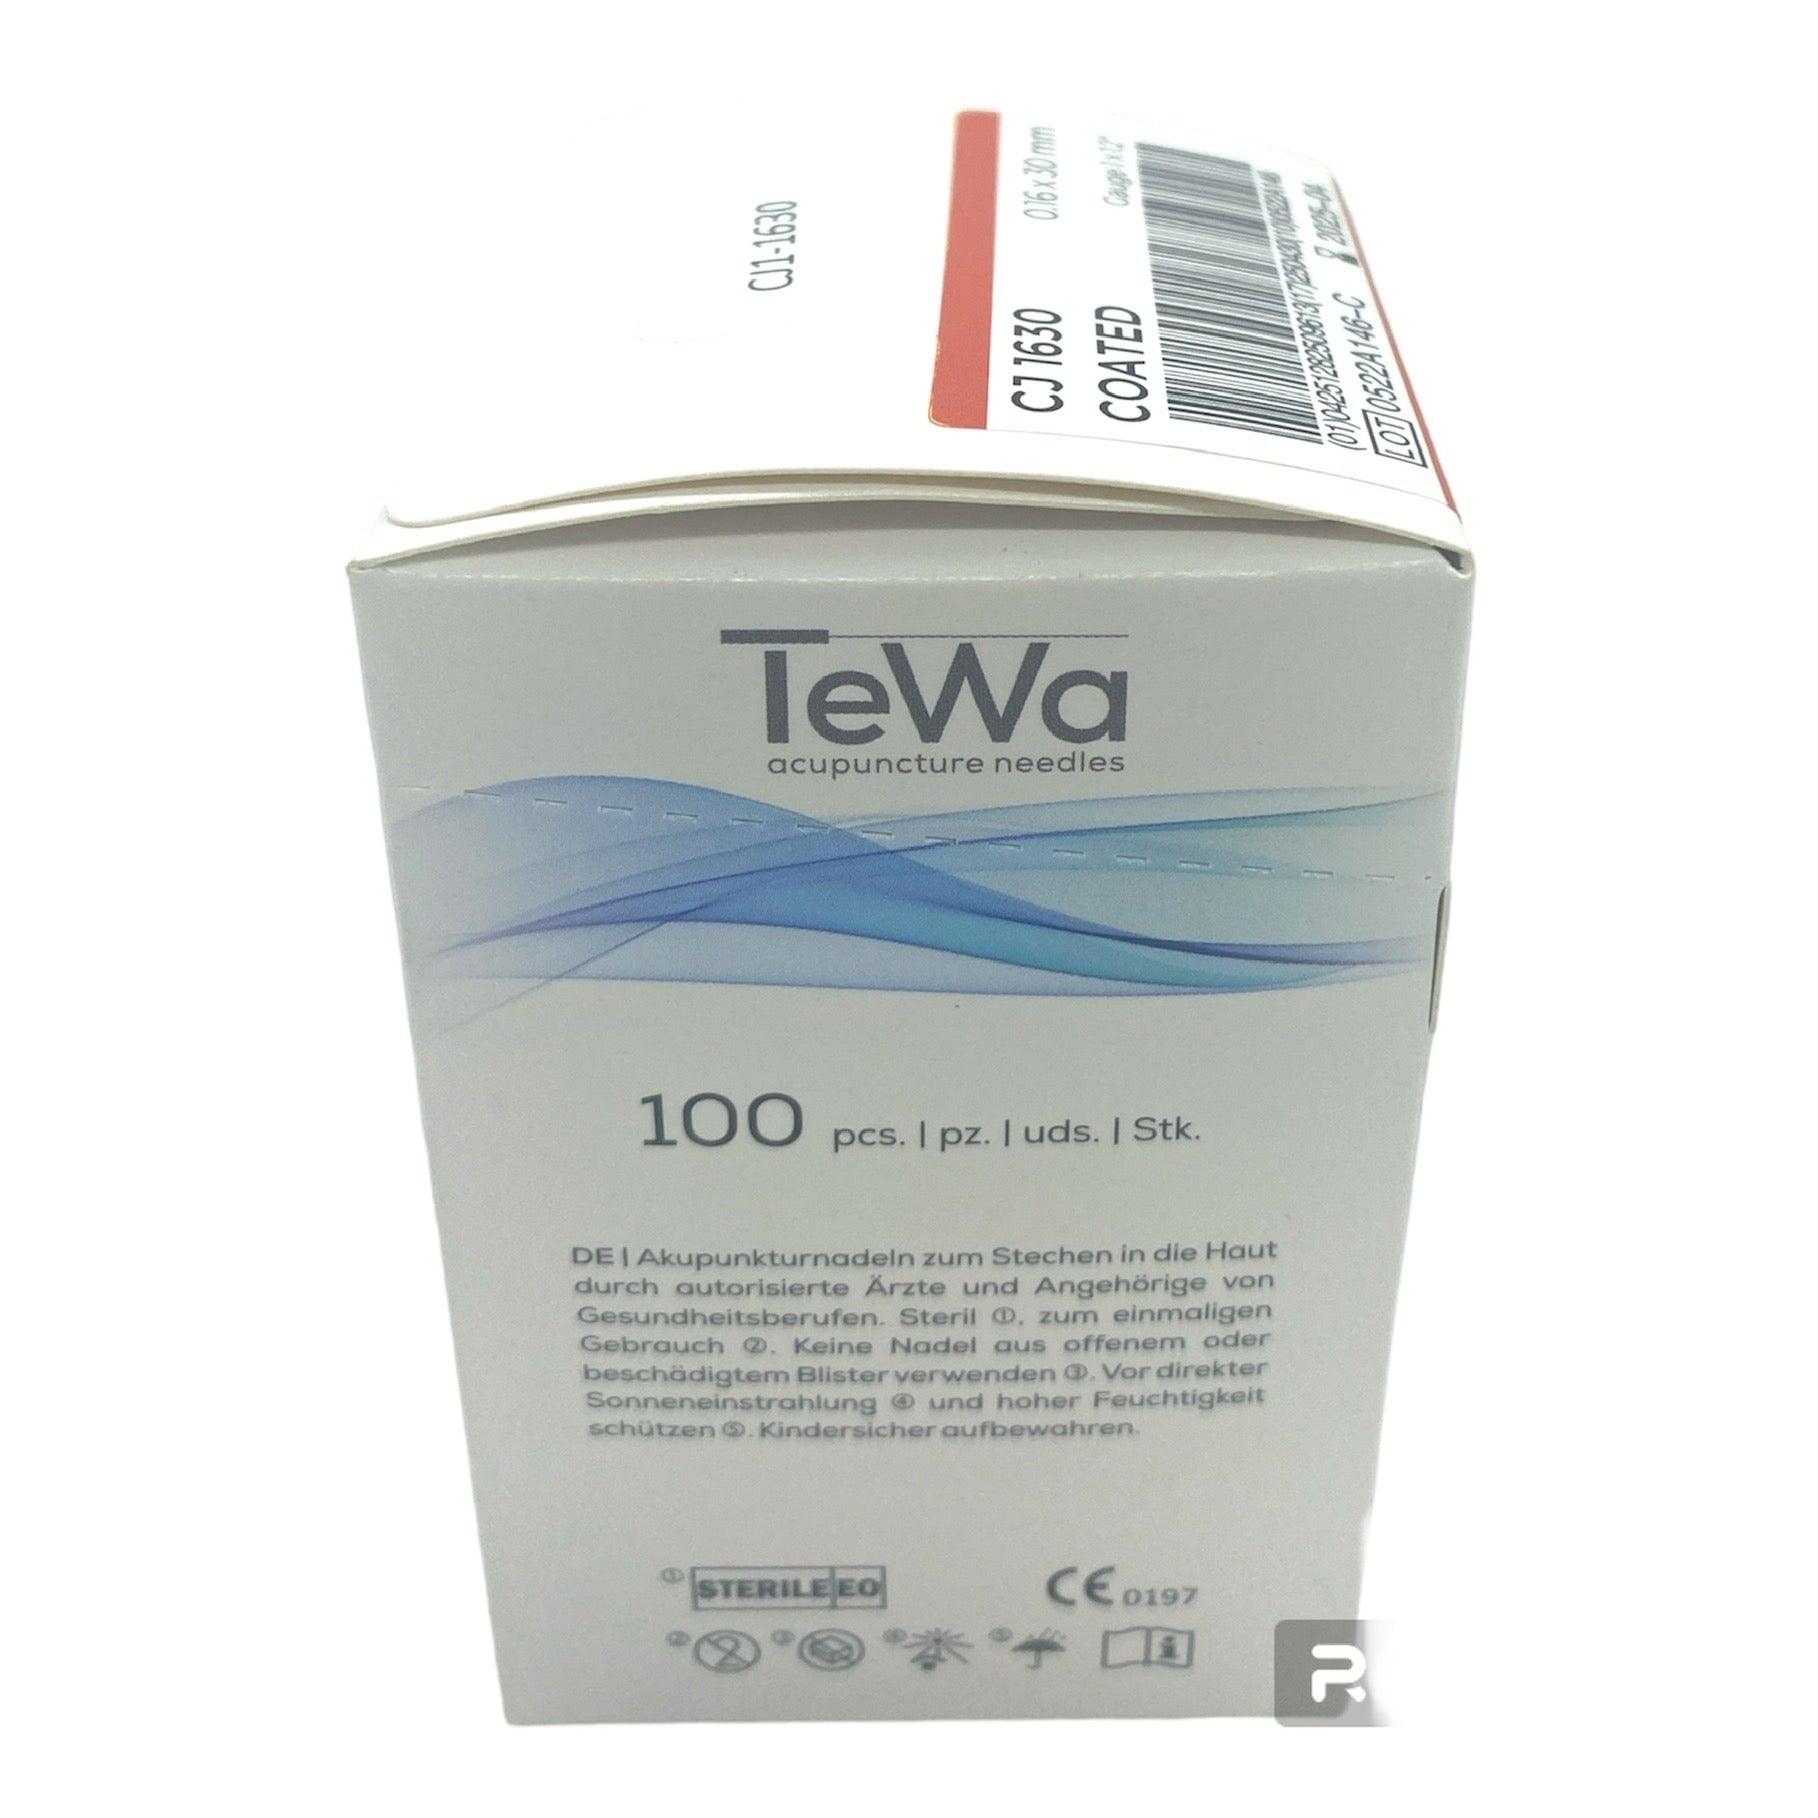 TeWa Acupuncture Needles Coated|1x1.2G| 100 Pieces